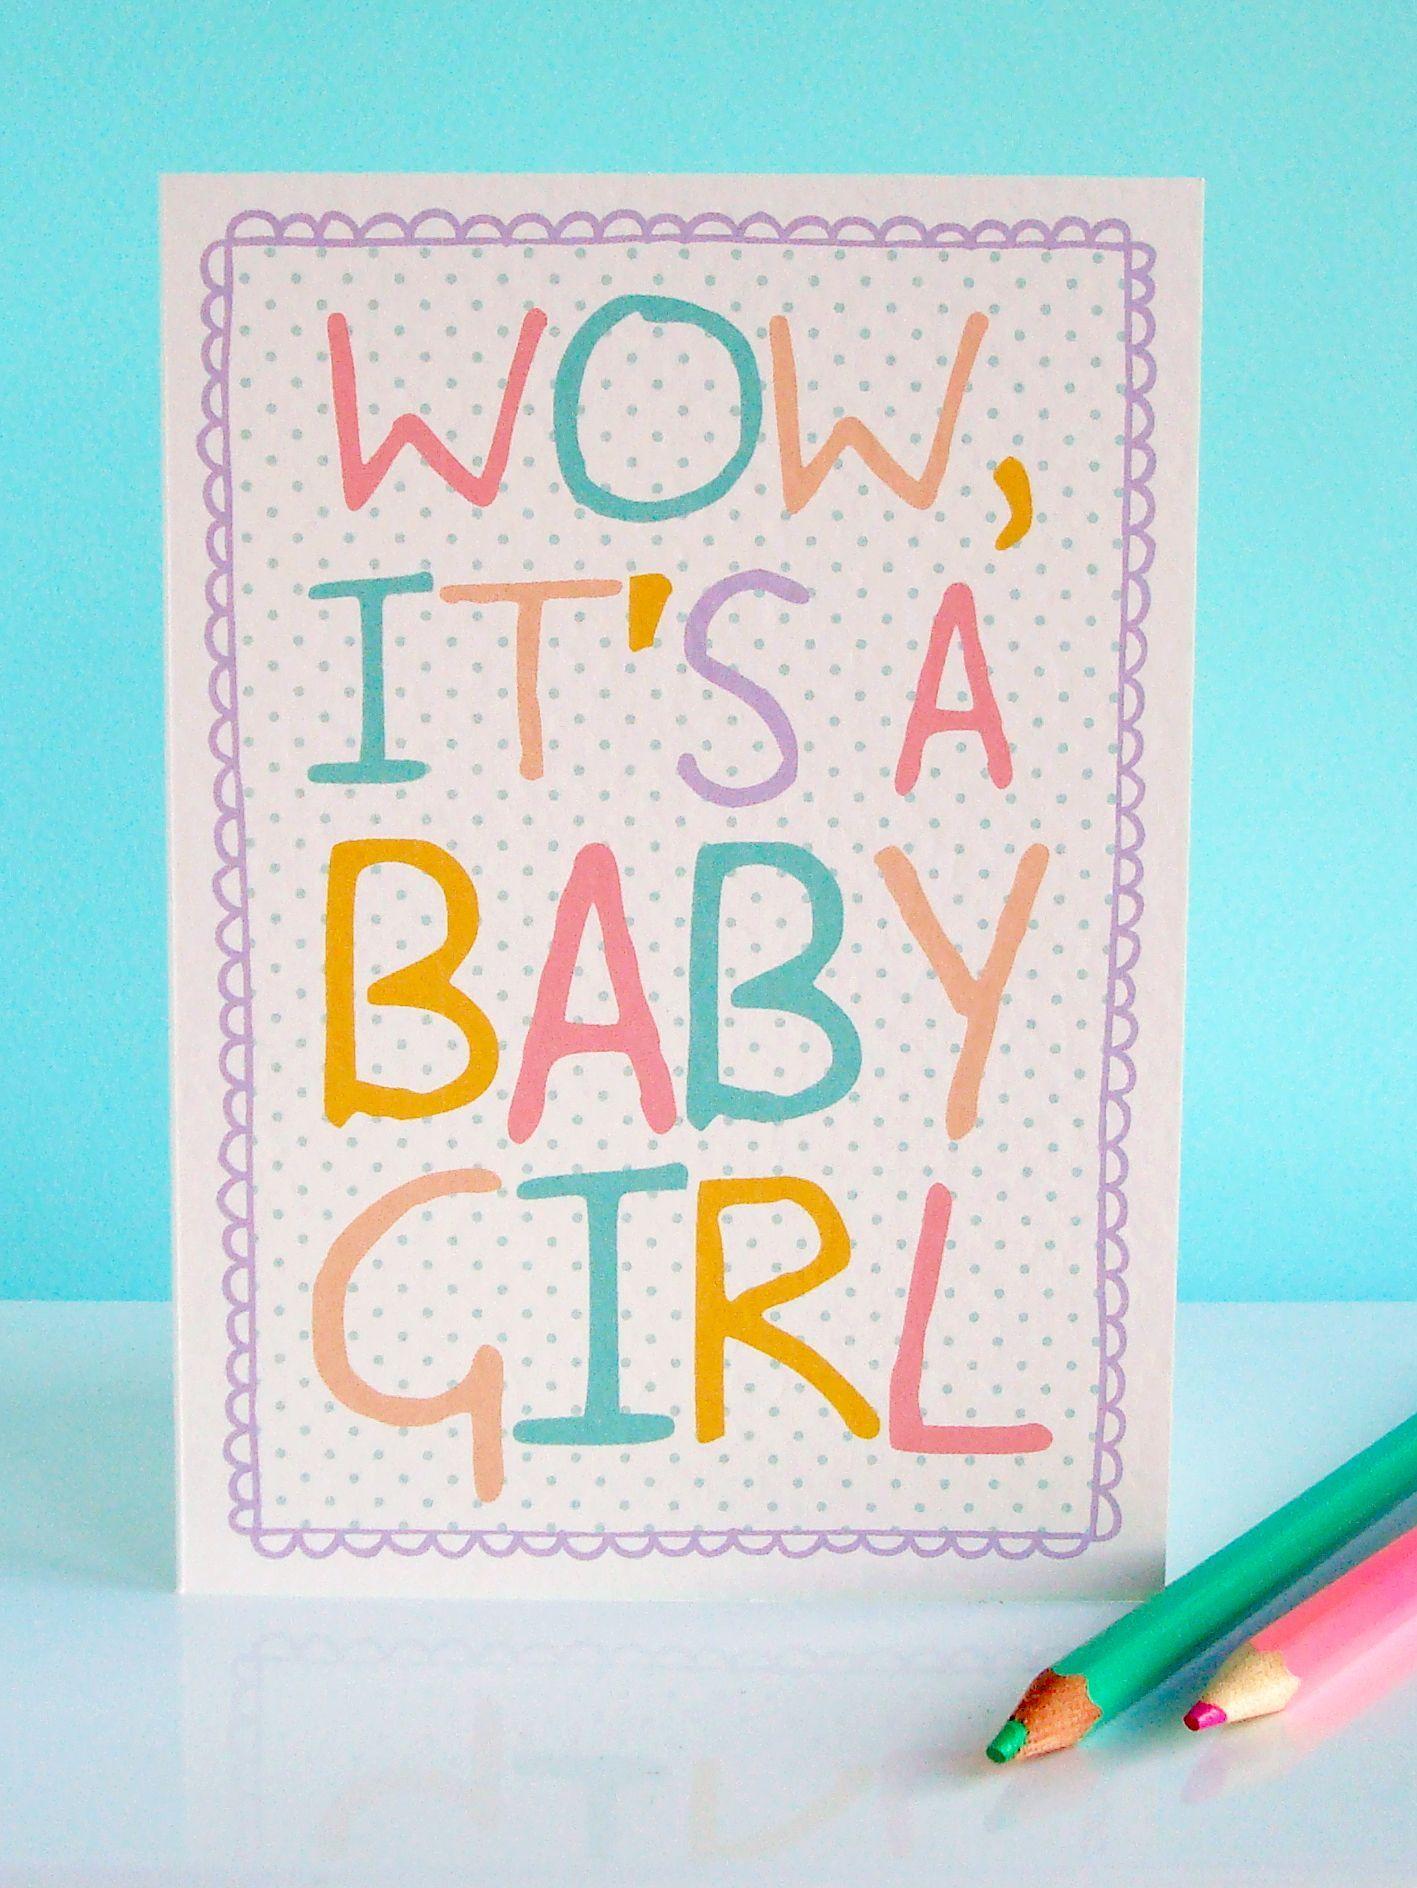 New Baby Card - Wow It's a Baby Girl